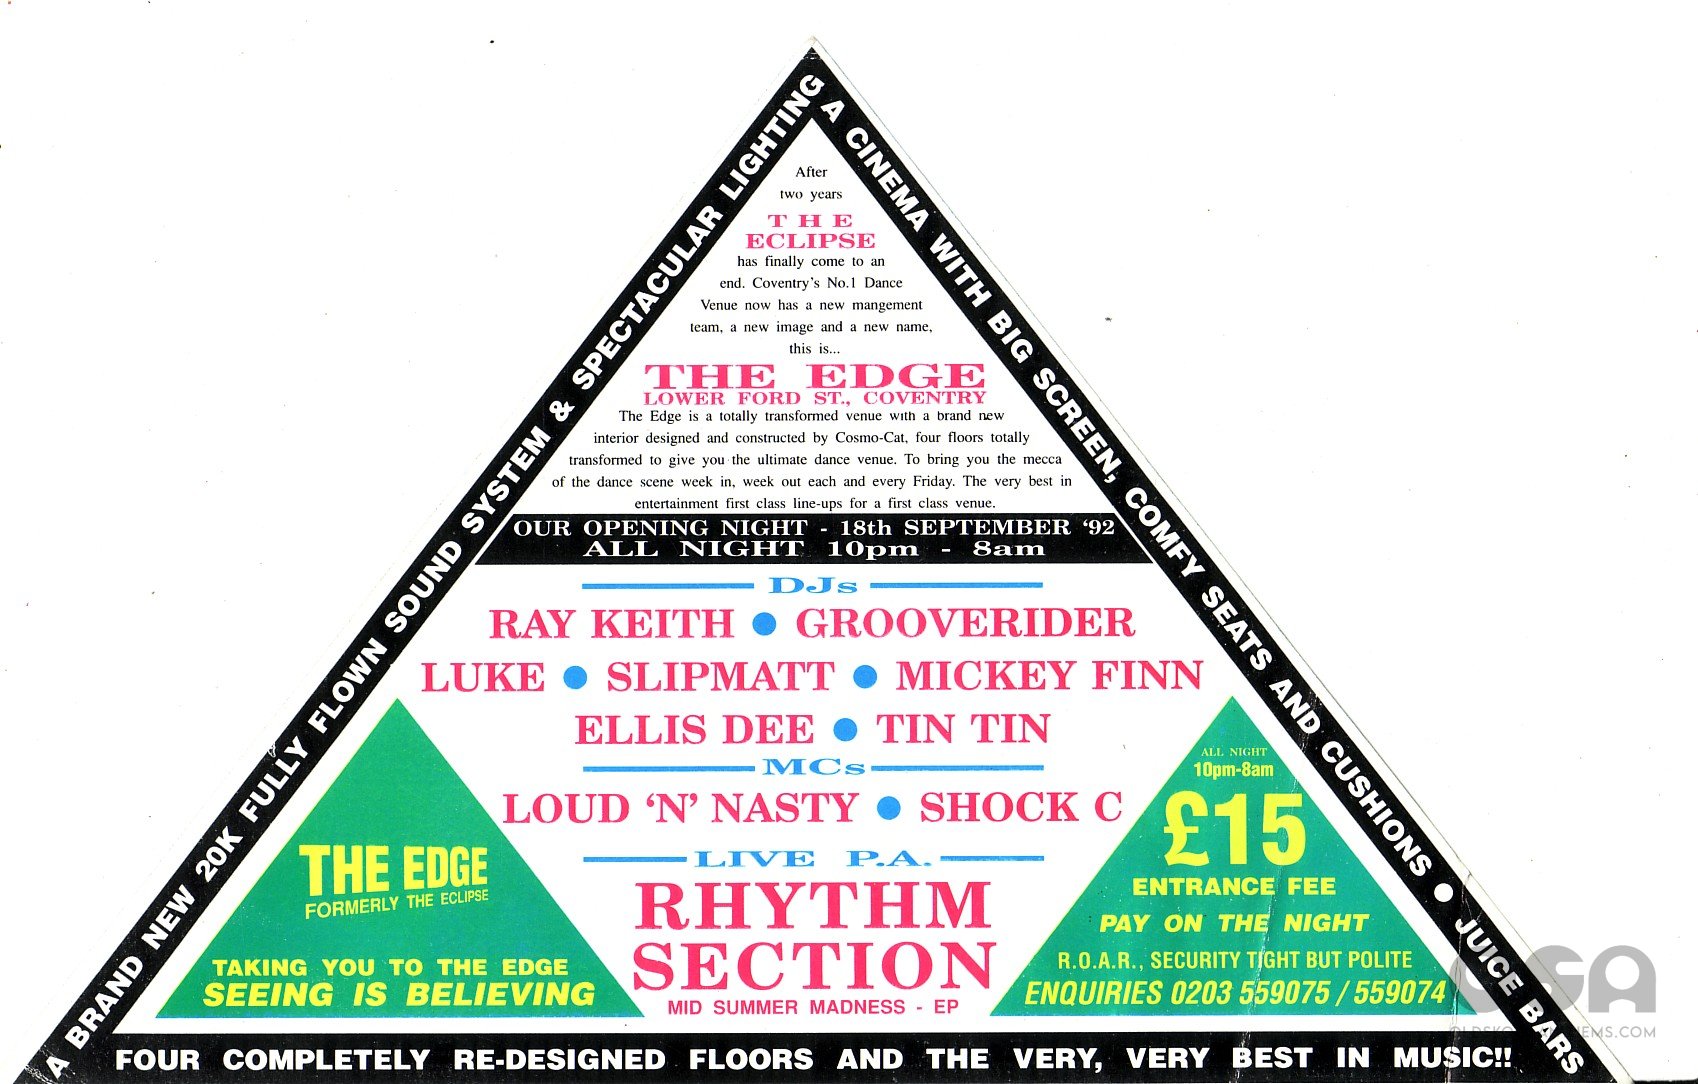 1_The_Edge_Coventry_Opening_18th_sept_1992_rear_view.jpg